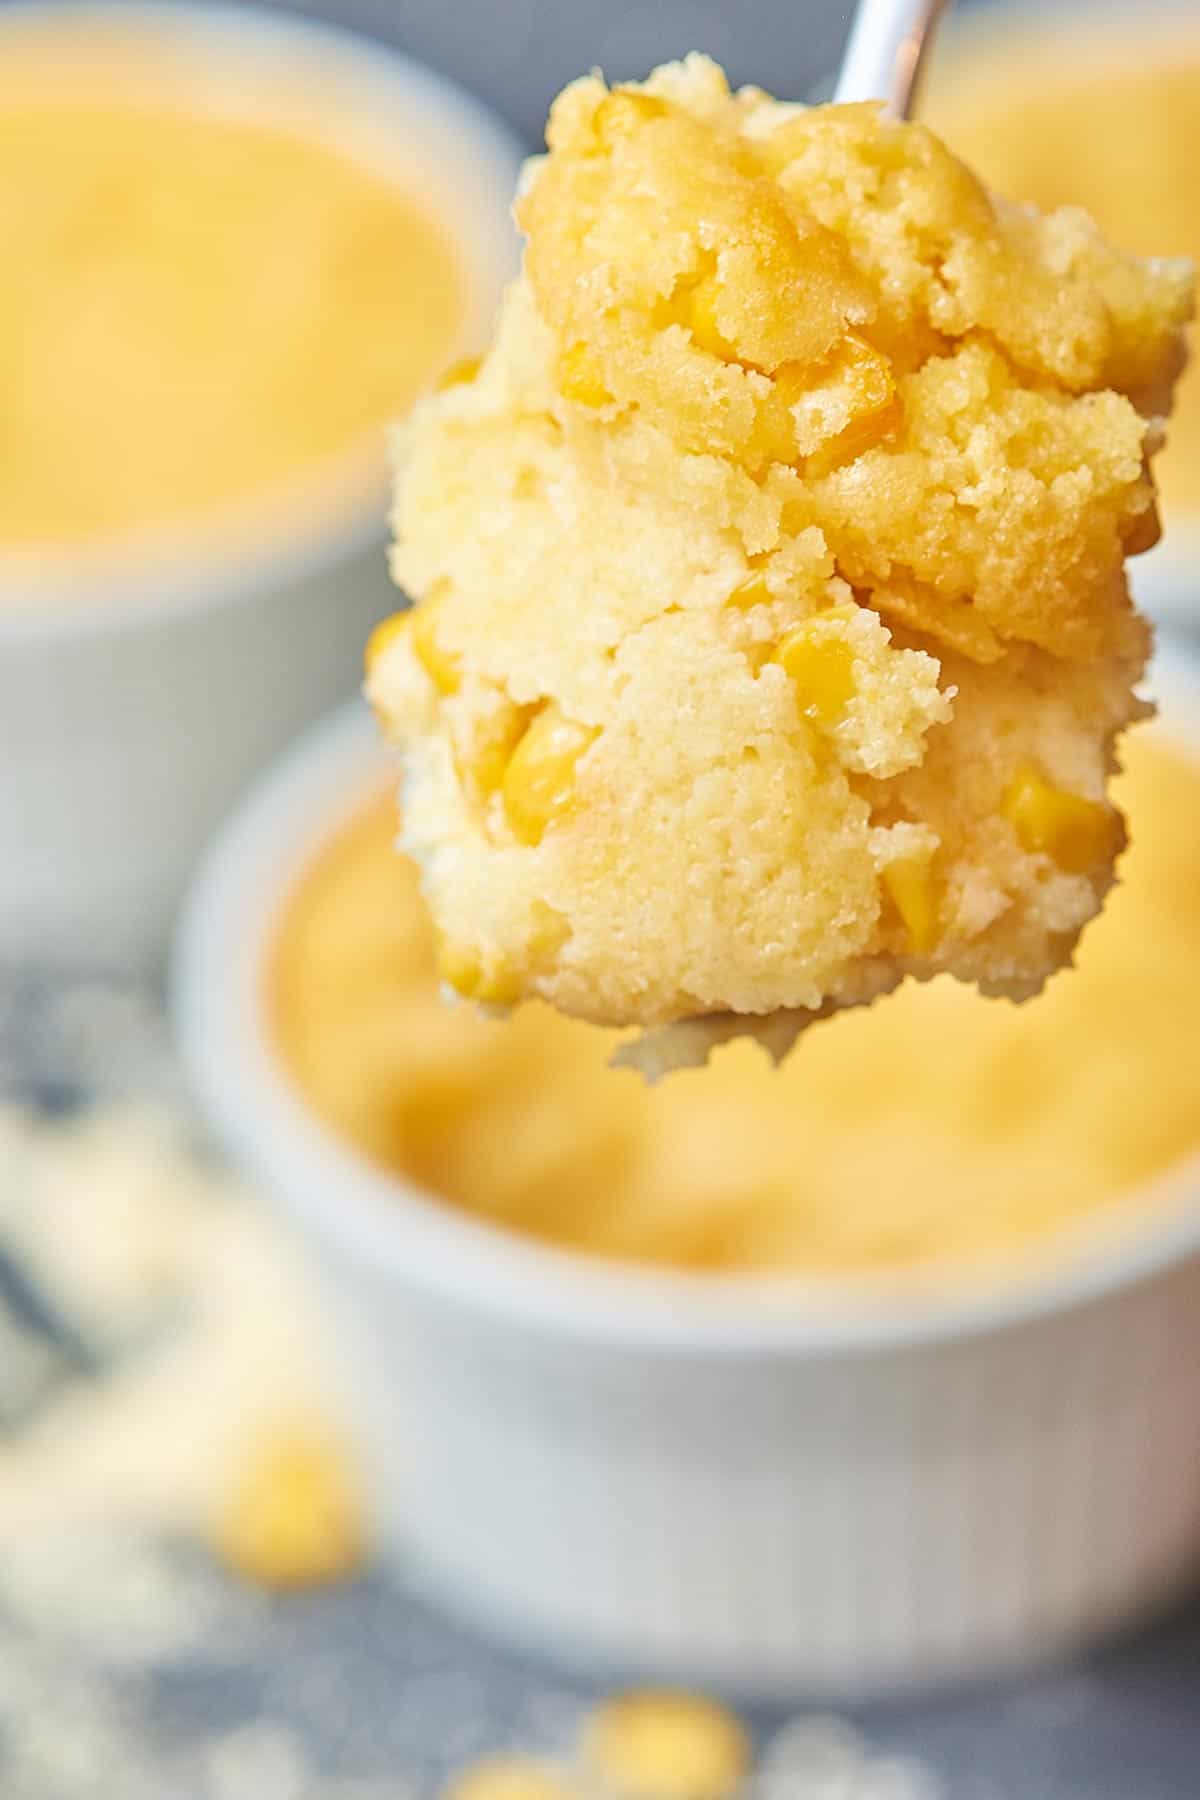 This creamy corn casserole tastes like an extra creamy cornbread that you eat with a spoon! It’s the perfect Thanksgiving side dish. The bonus? It’s so easy! Just dump all the ingredients together in a bowl, stir, and bake! https://showmetheyummy.com #thanksgiving #corncasserole 